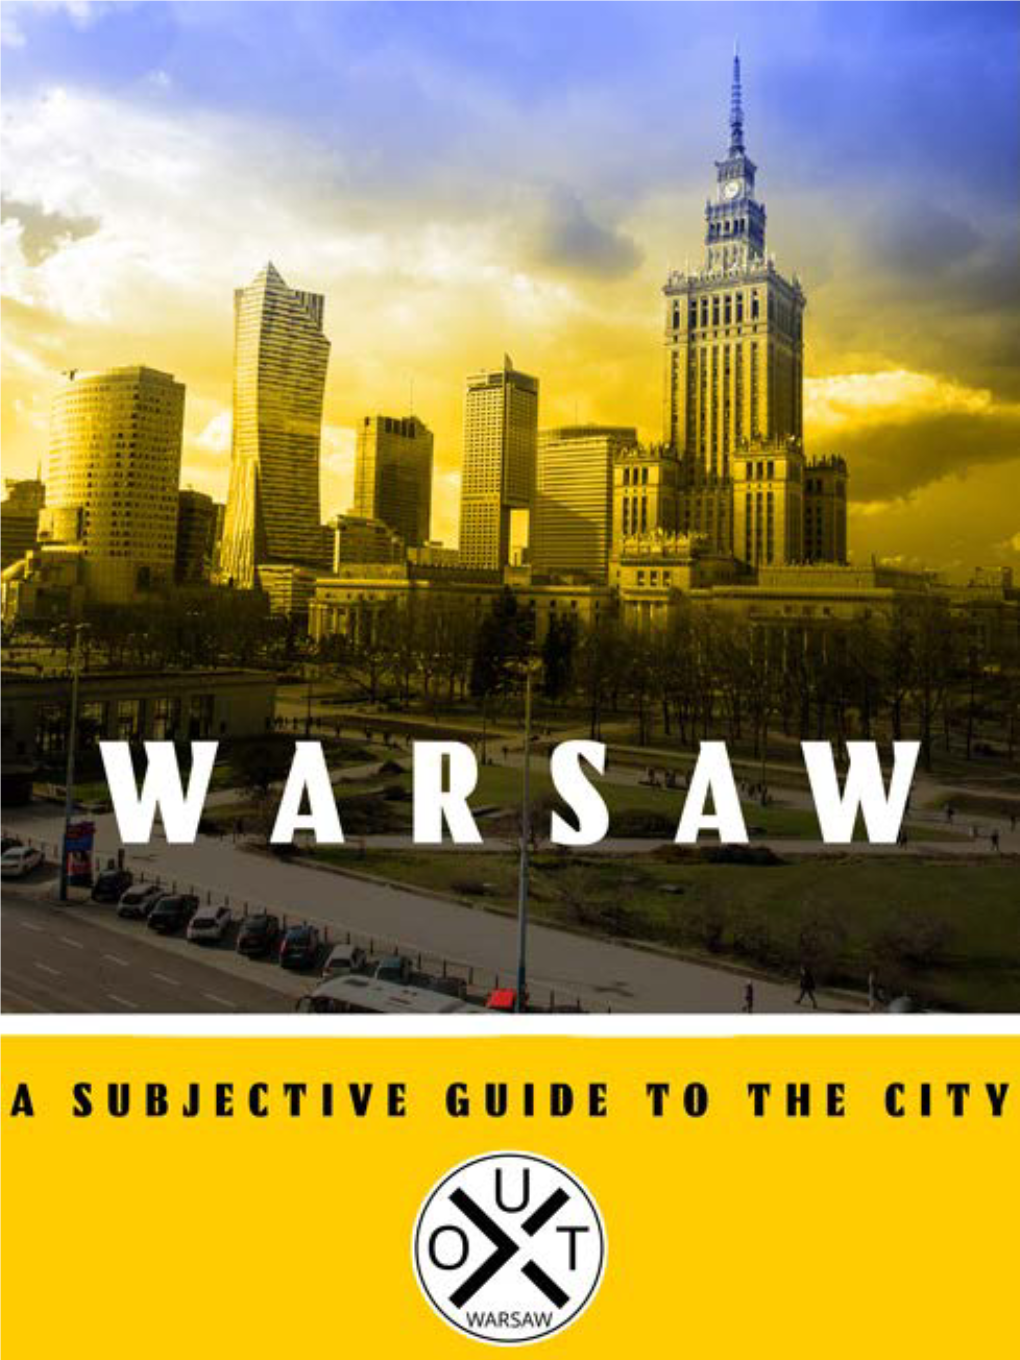 Warsaw.A.Subjective.Guide .To .The